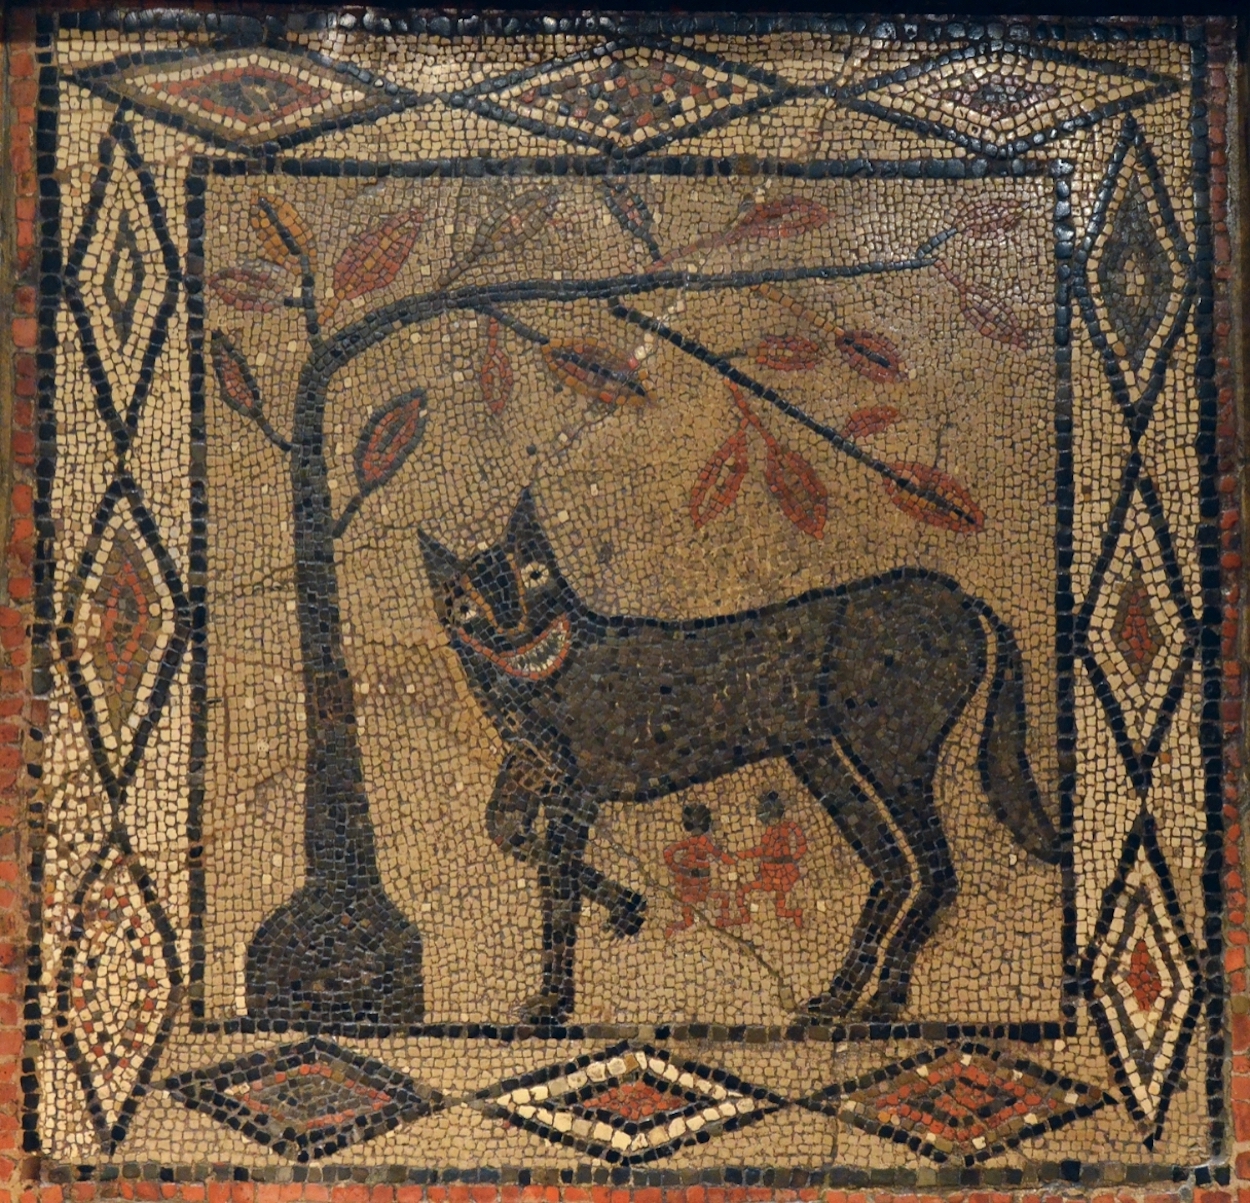 She-wolf with Romulus and Remus by Unknown Artist - c.300 AD Leeds City Museum